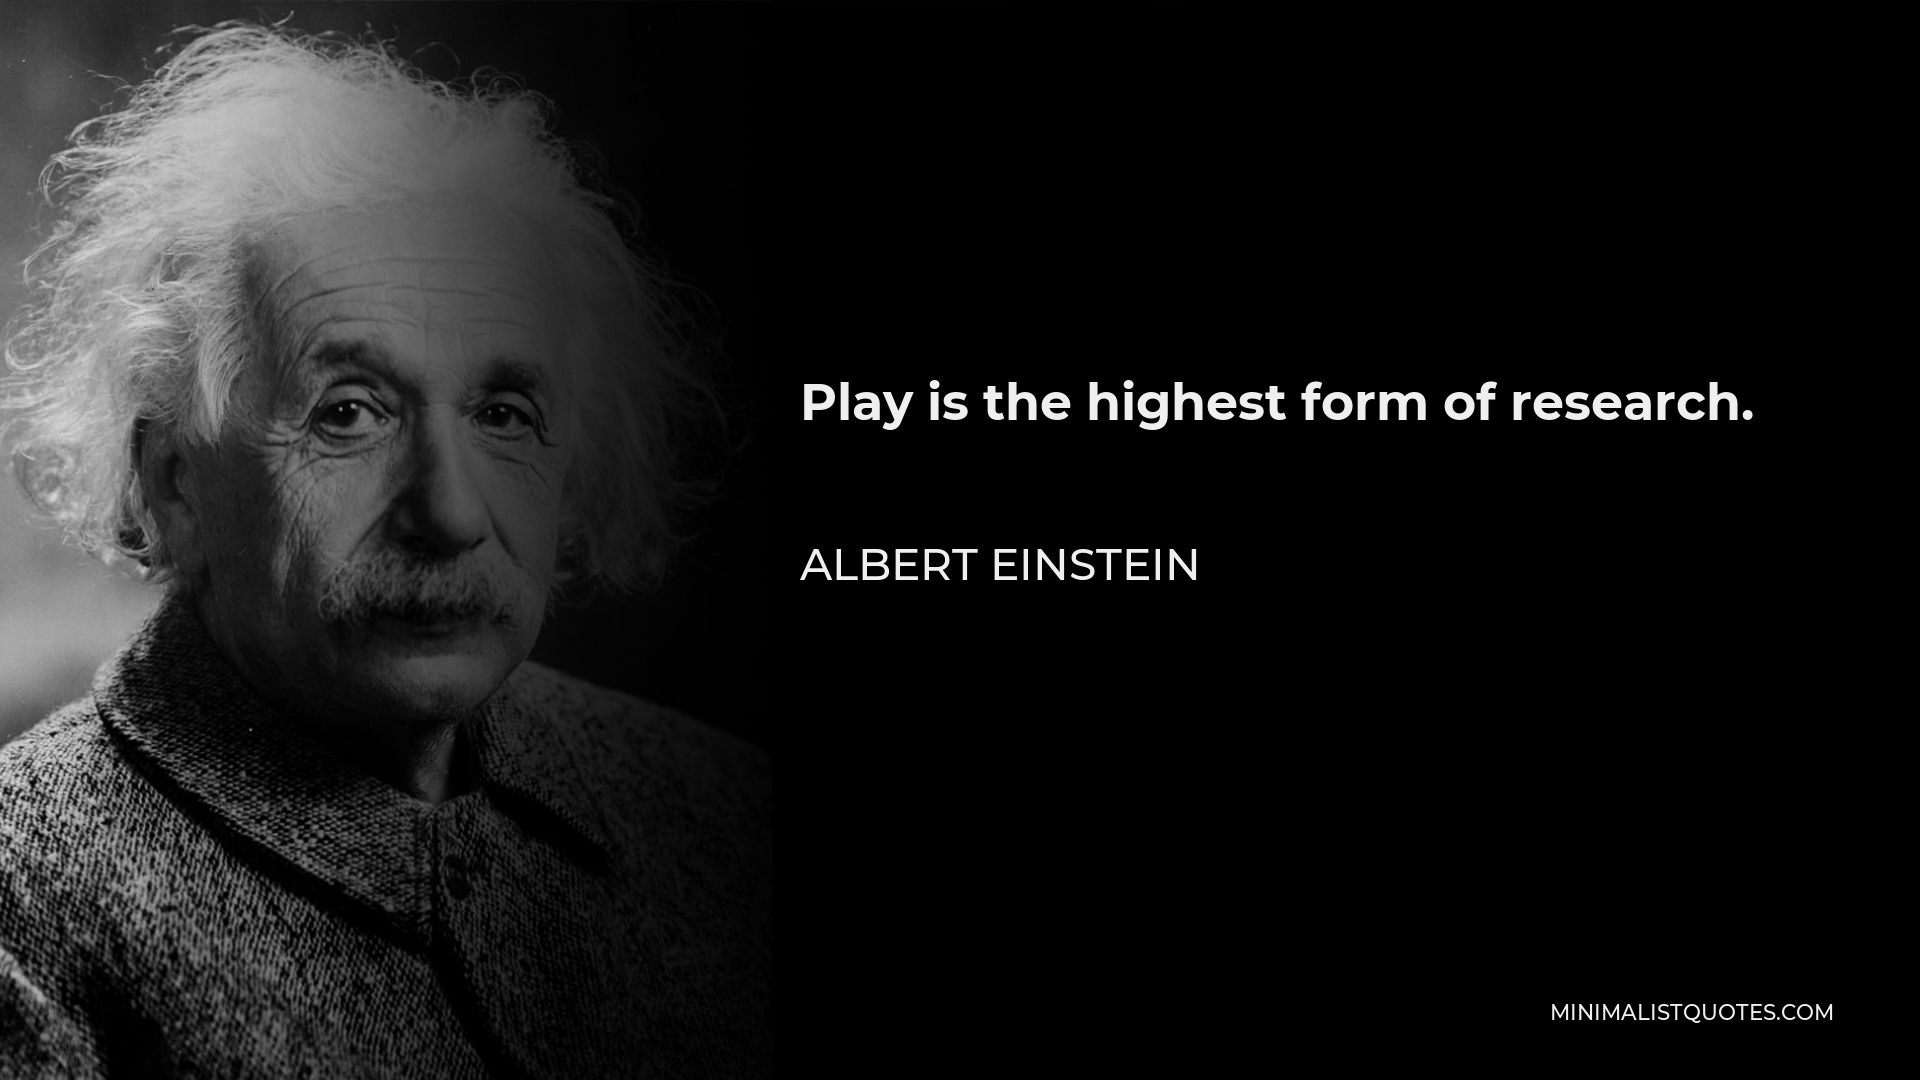 Albert Einstein Quote: Play is the highest form of research.